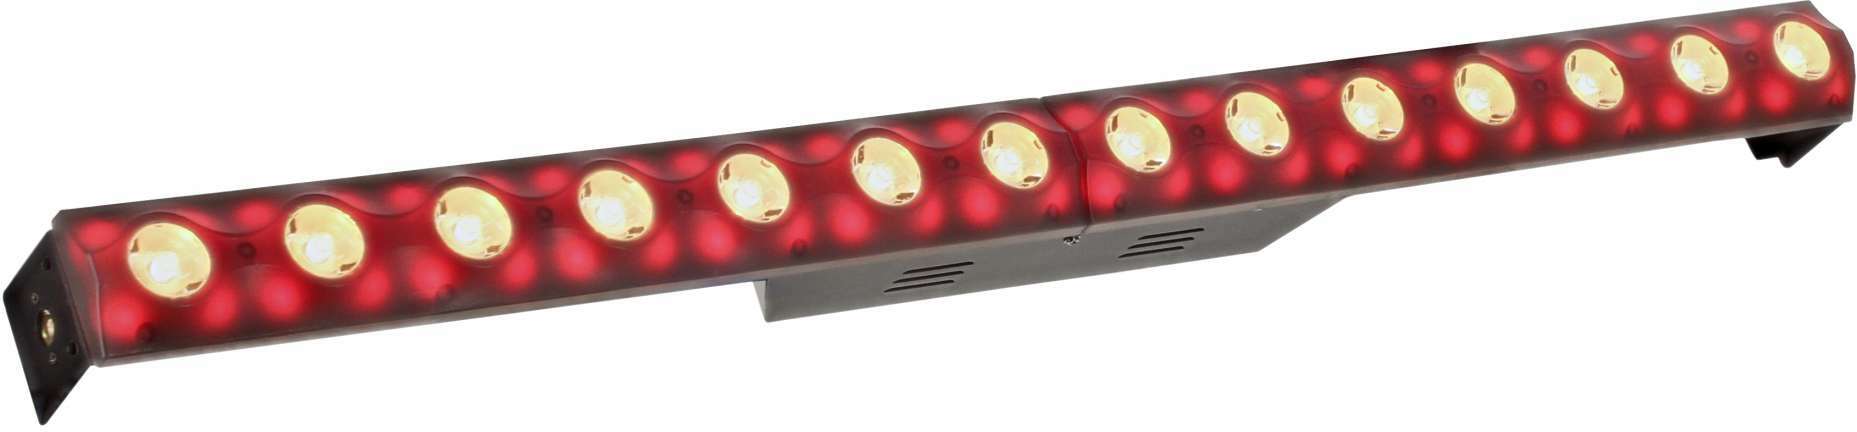 Power Lighting Barre Led 14x3w Crystal - LED bar - Main picture